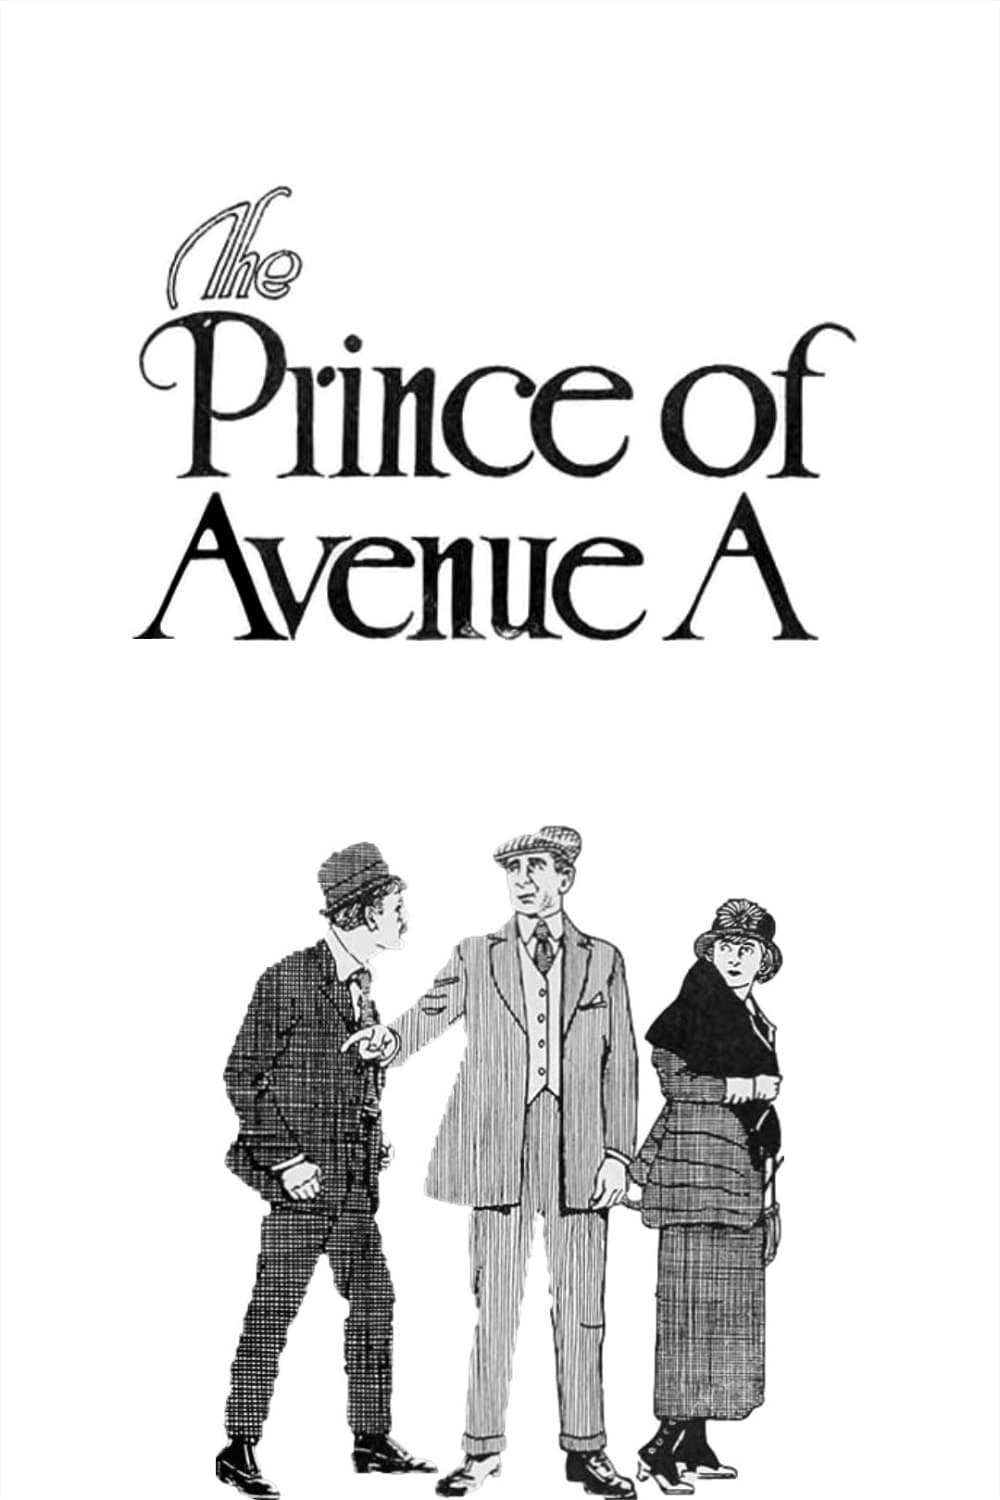 The Prince of Avenue A